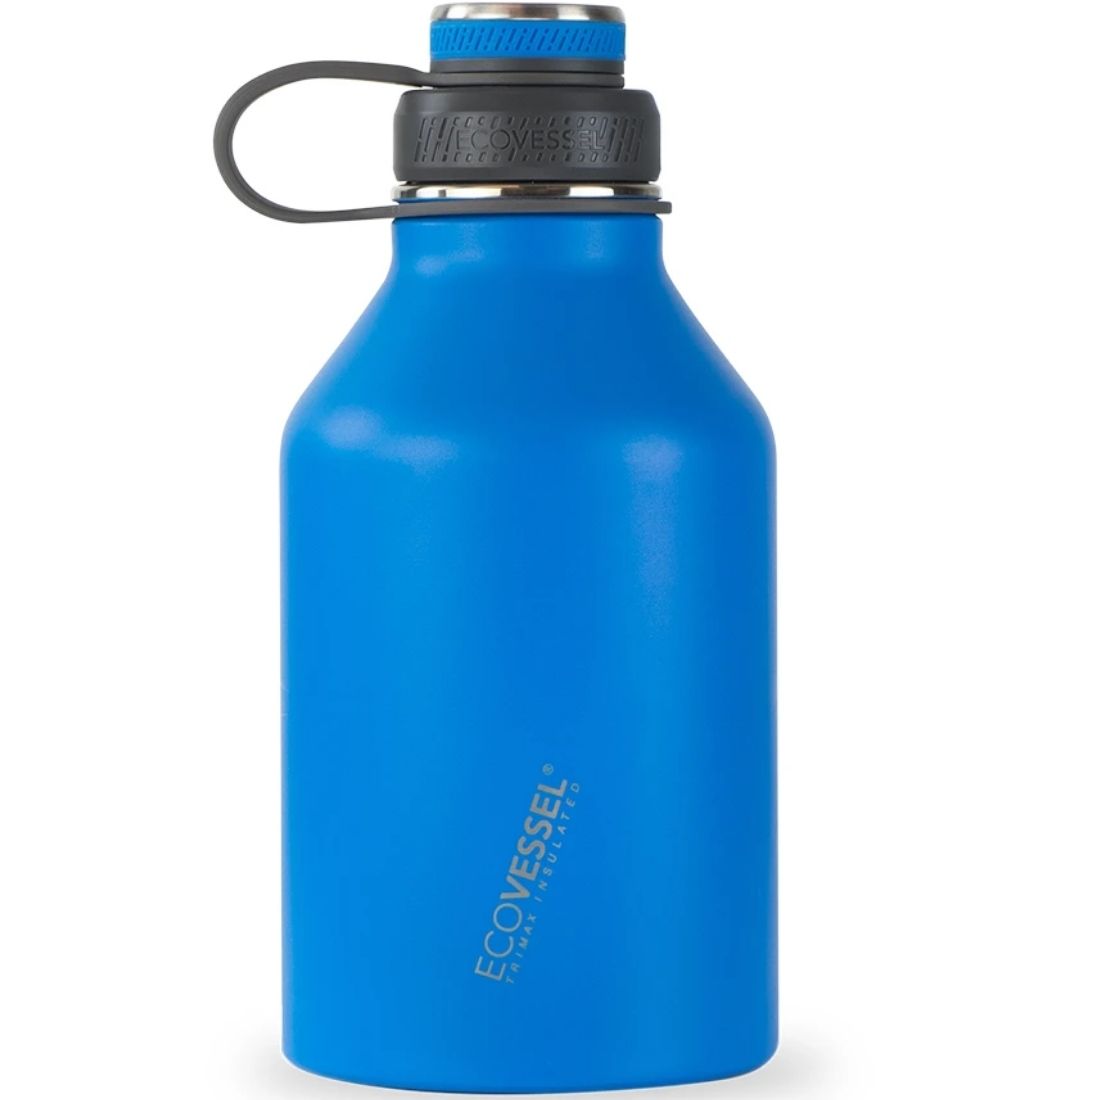 EcoVessel BOSS (Vacuum Insulated Stainless Steel) Growler, 1900ml